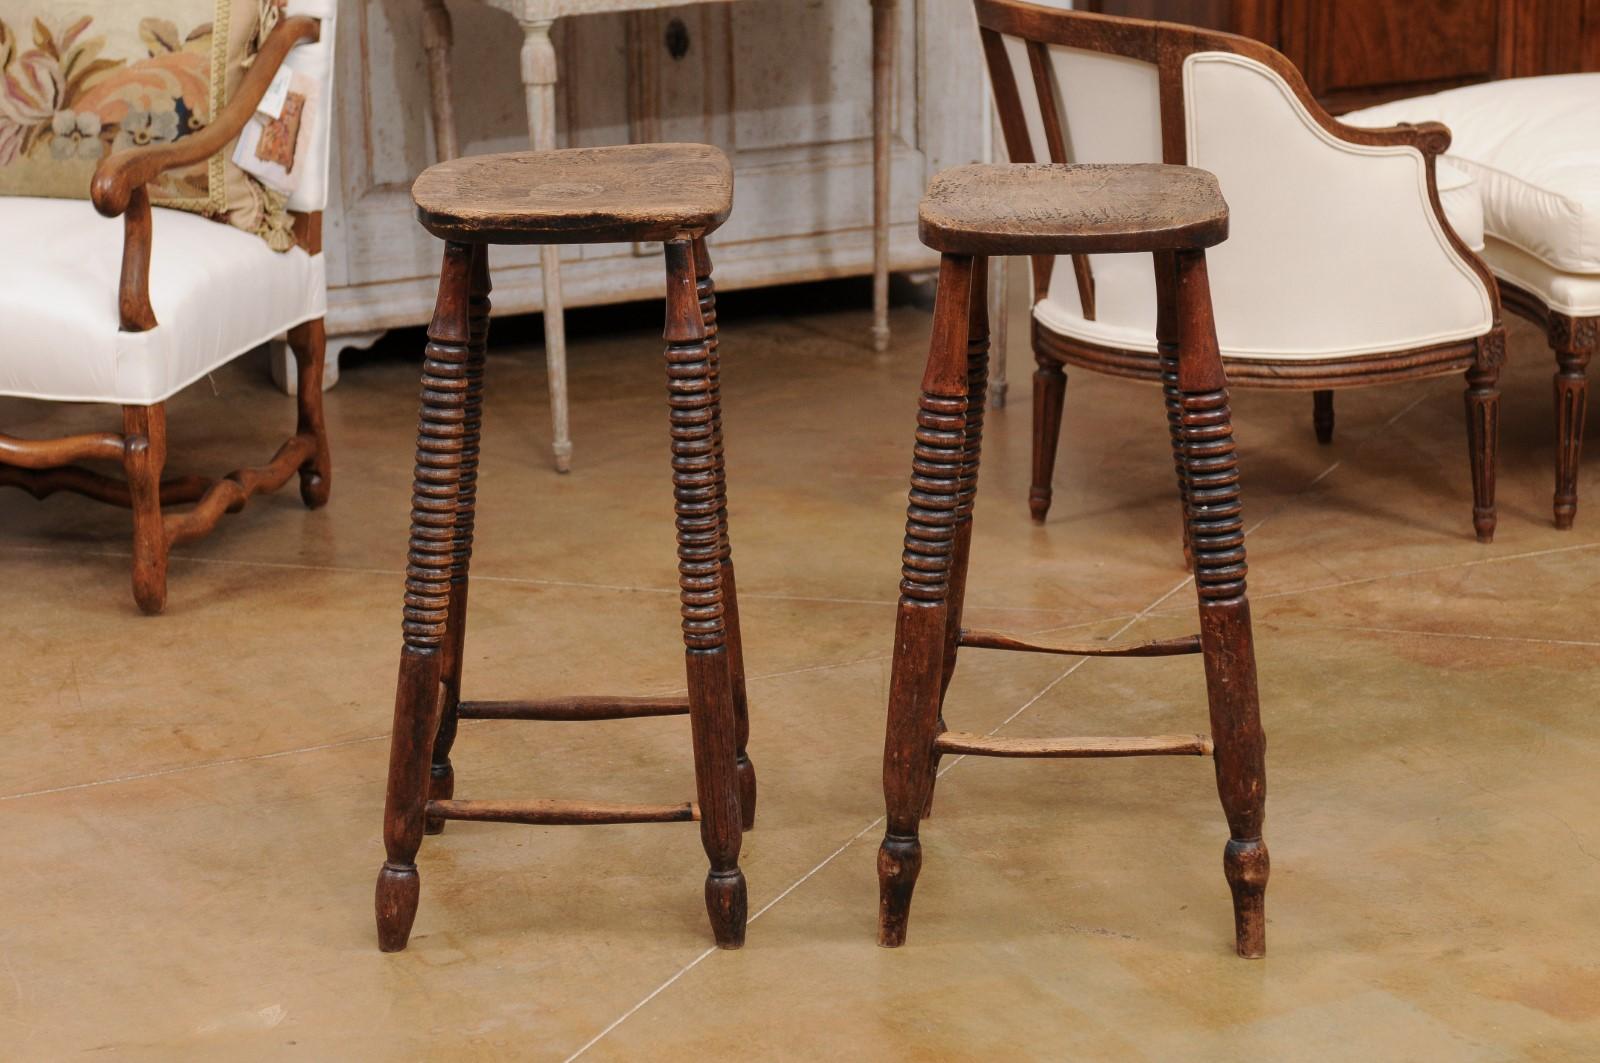 Turned Pair of 1870s French Wooden Bar Stools with Spool Legs and Weathered Patina